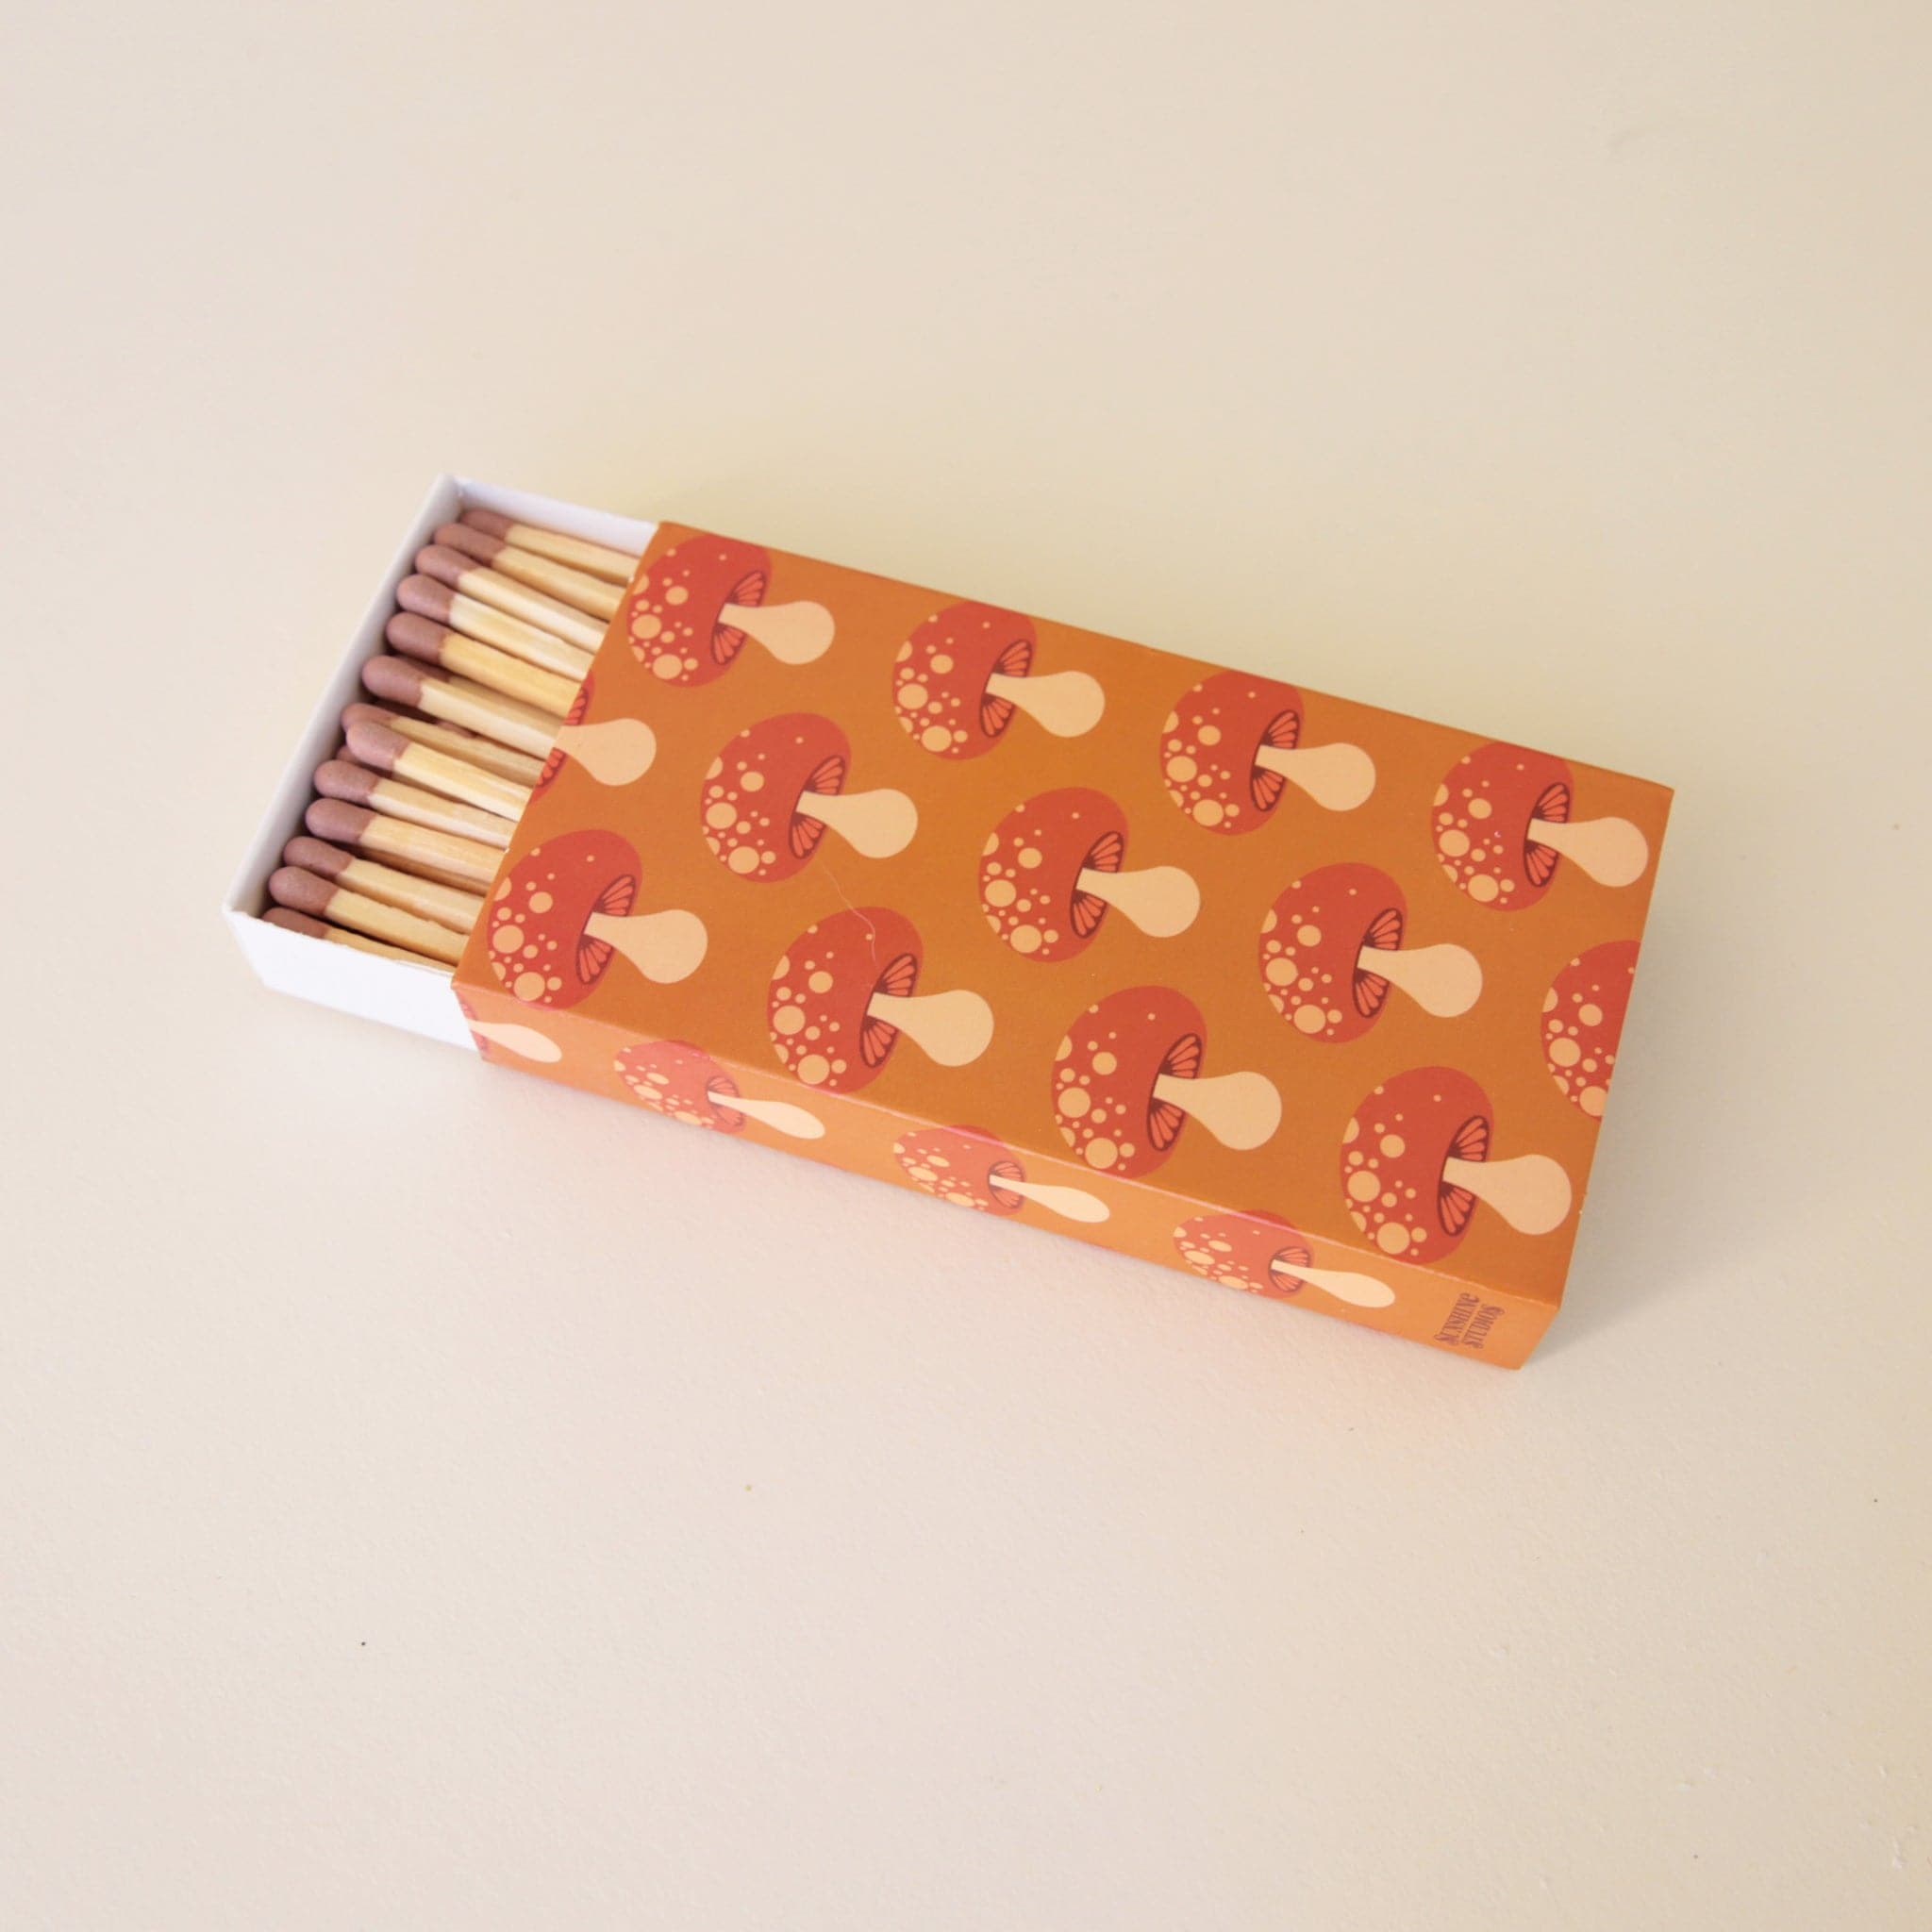 A rectangle box of matches with a repeating red mushroom design along all edges besides the top and bottom. The matches that are inside are also photographed here. They are wooden matches the same length as the box with a red striking tip for lighting.  Edit alt text